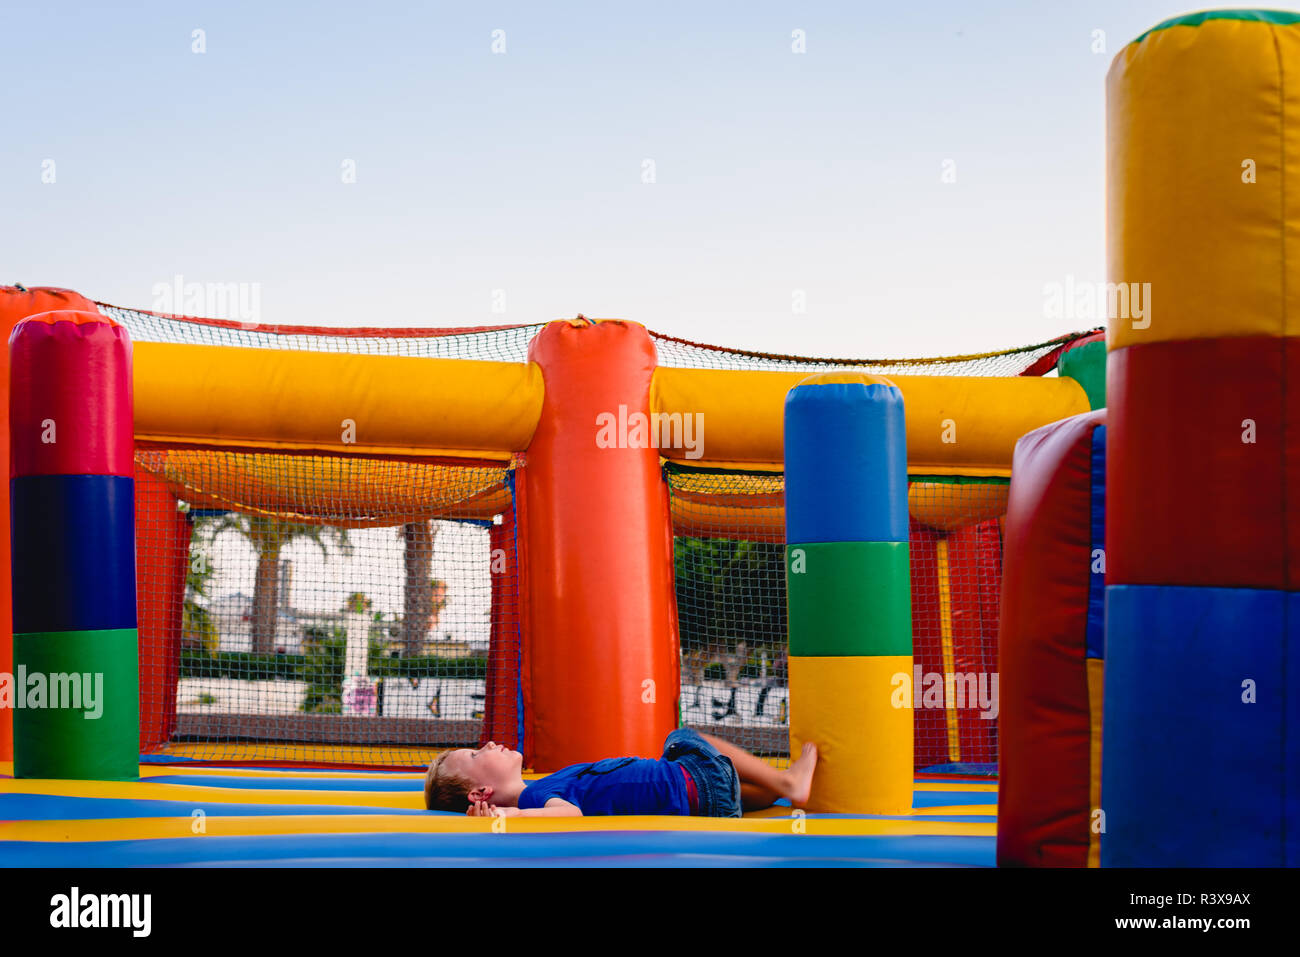 Inflatable castle of many colors without anyone. Stock Photo